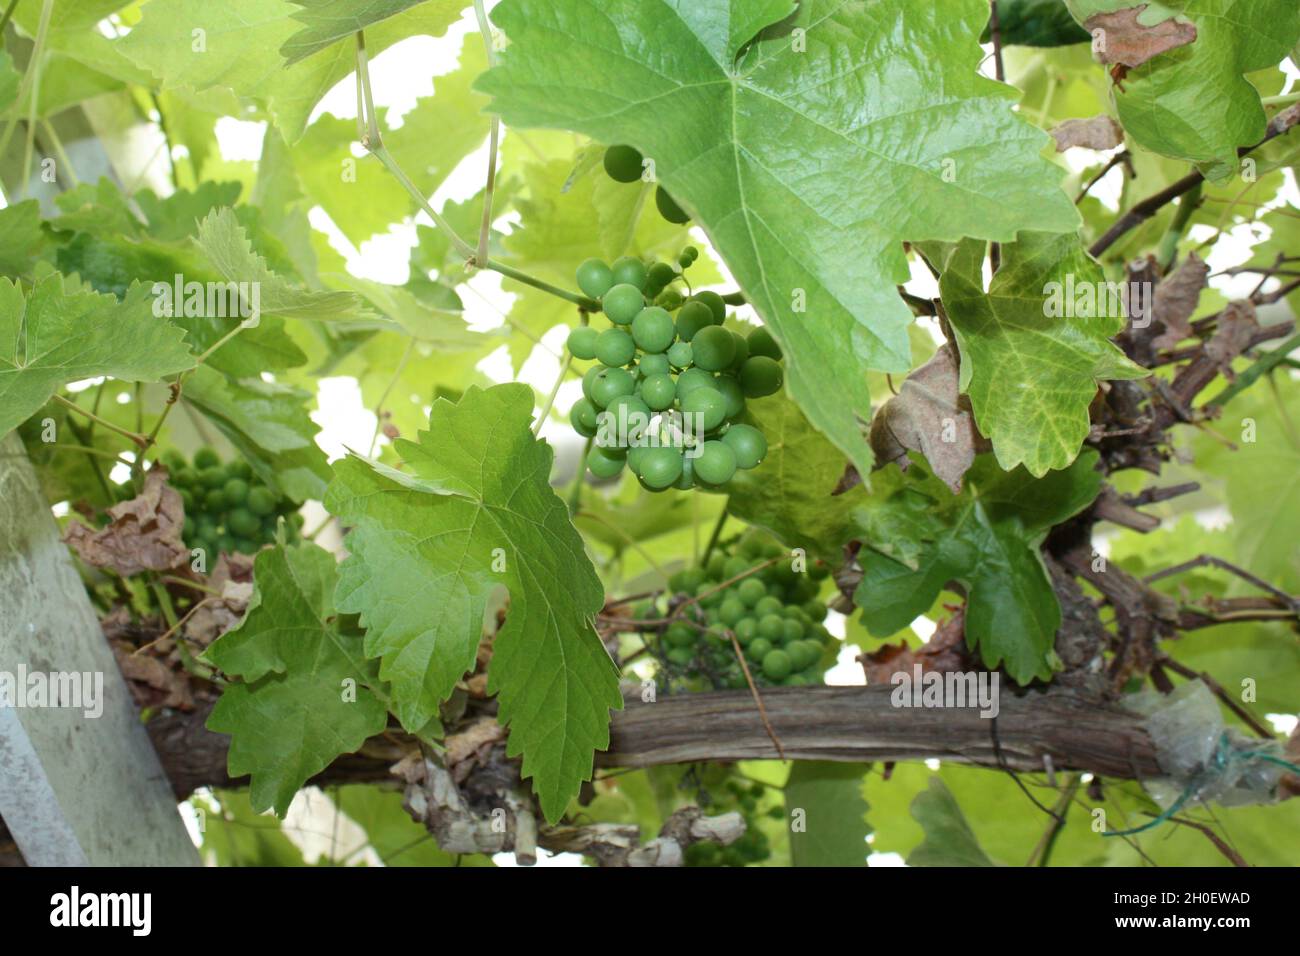 Home grown grapes in greenhouse. Stock Photo